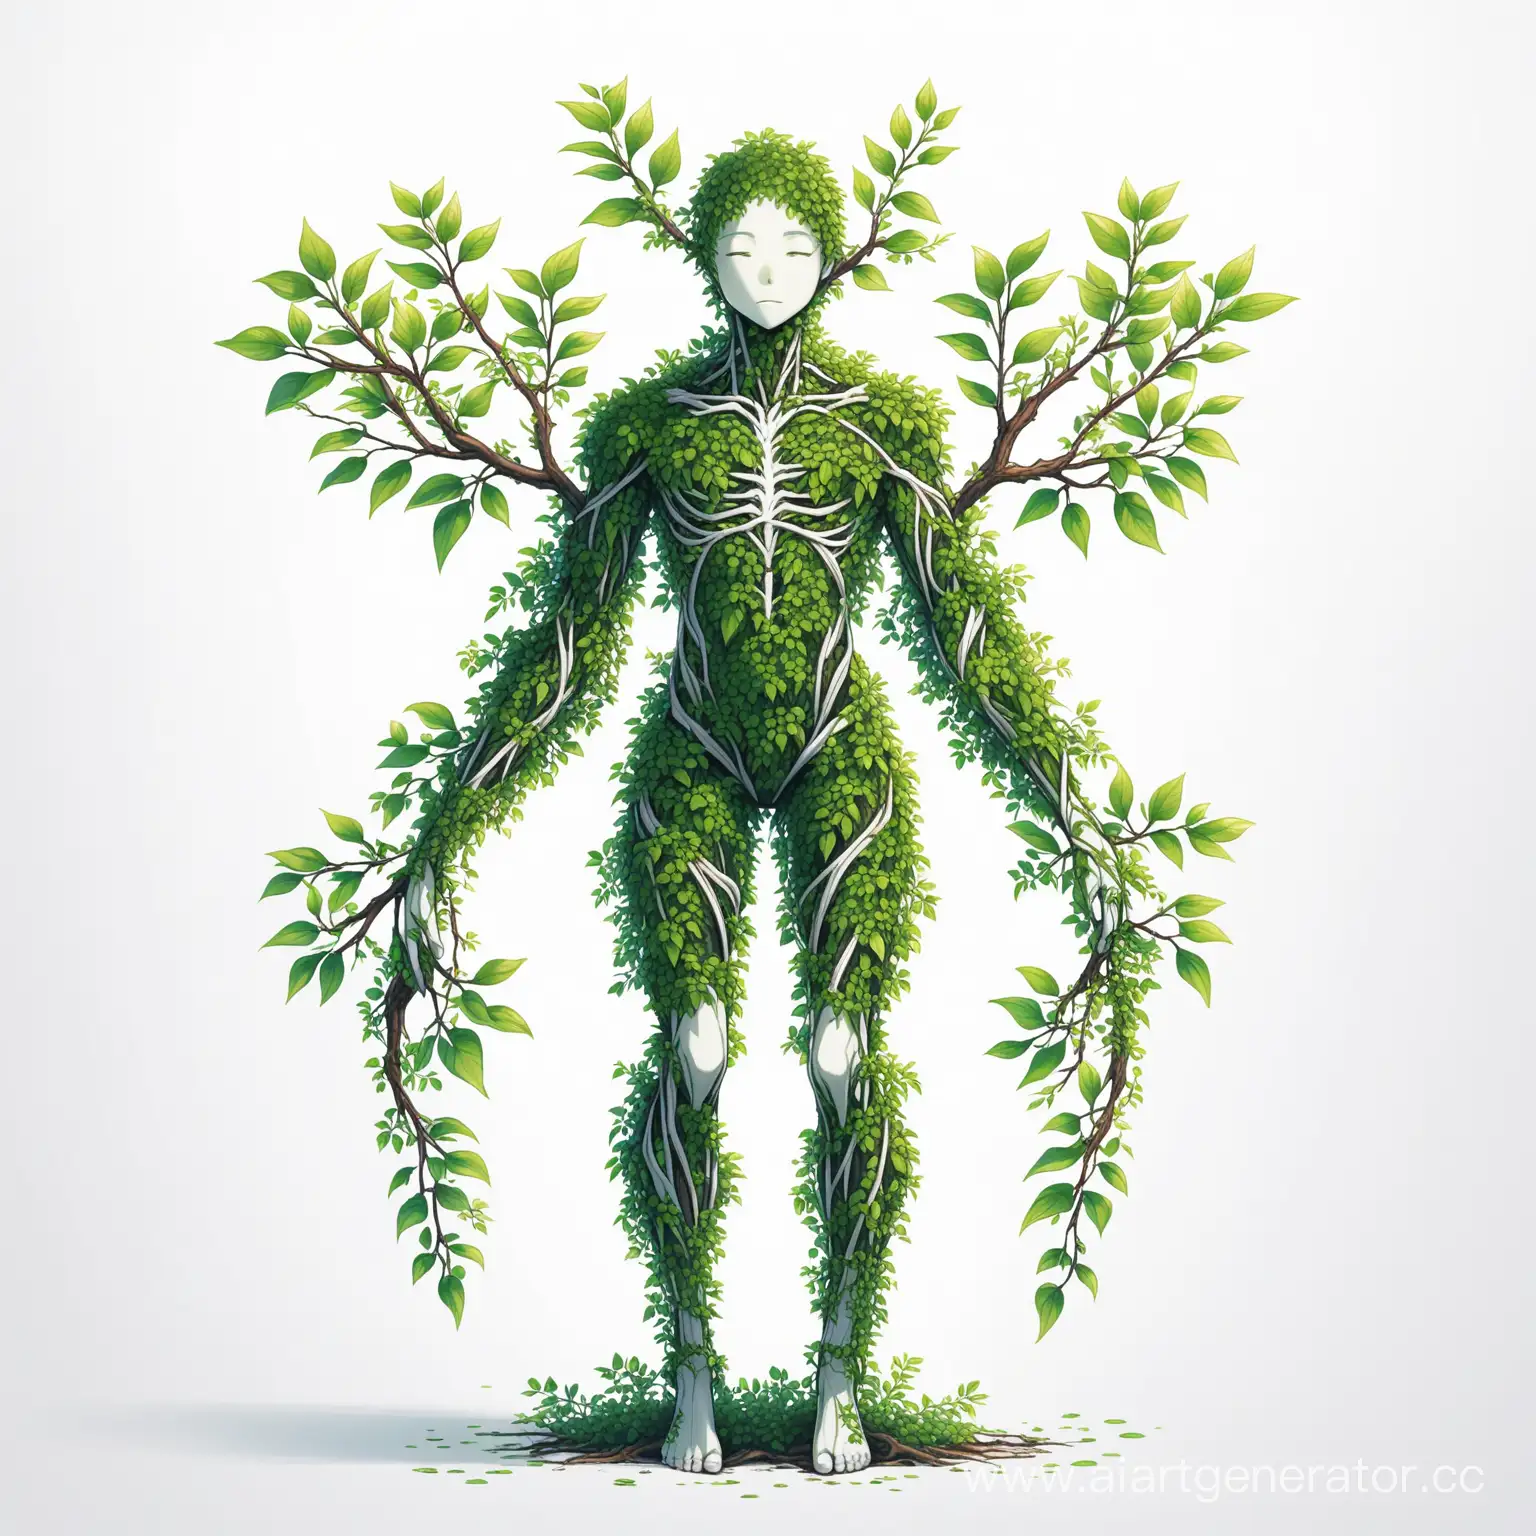 PlantHuman-Hybrid-with-Branch-Limbs-on-White-Background